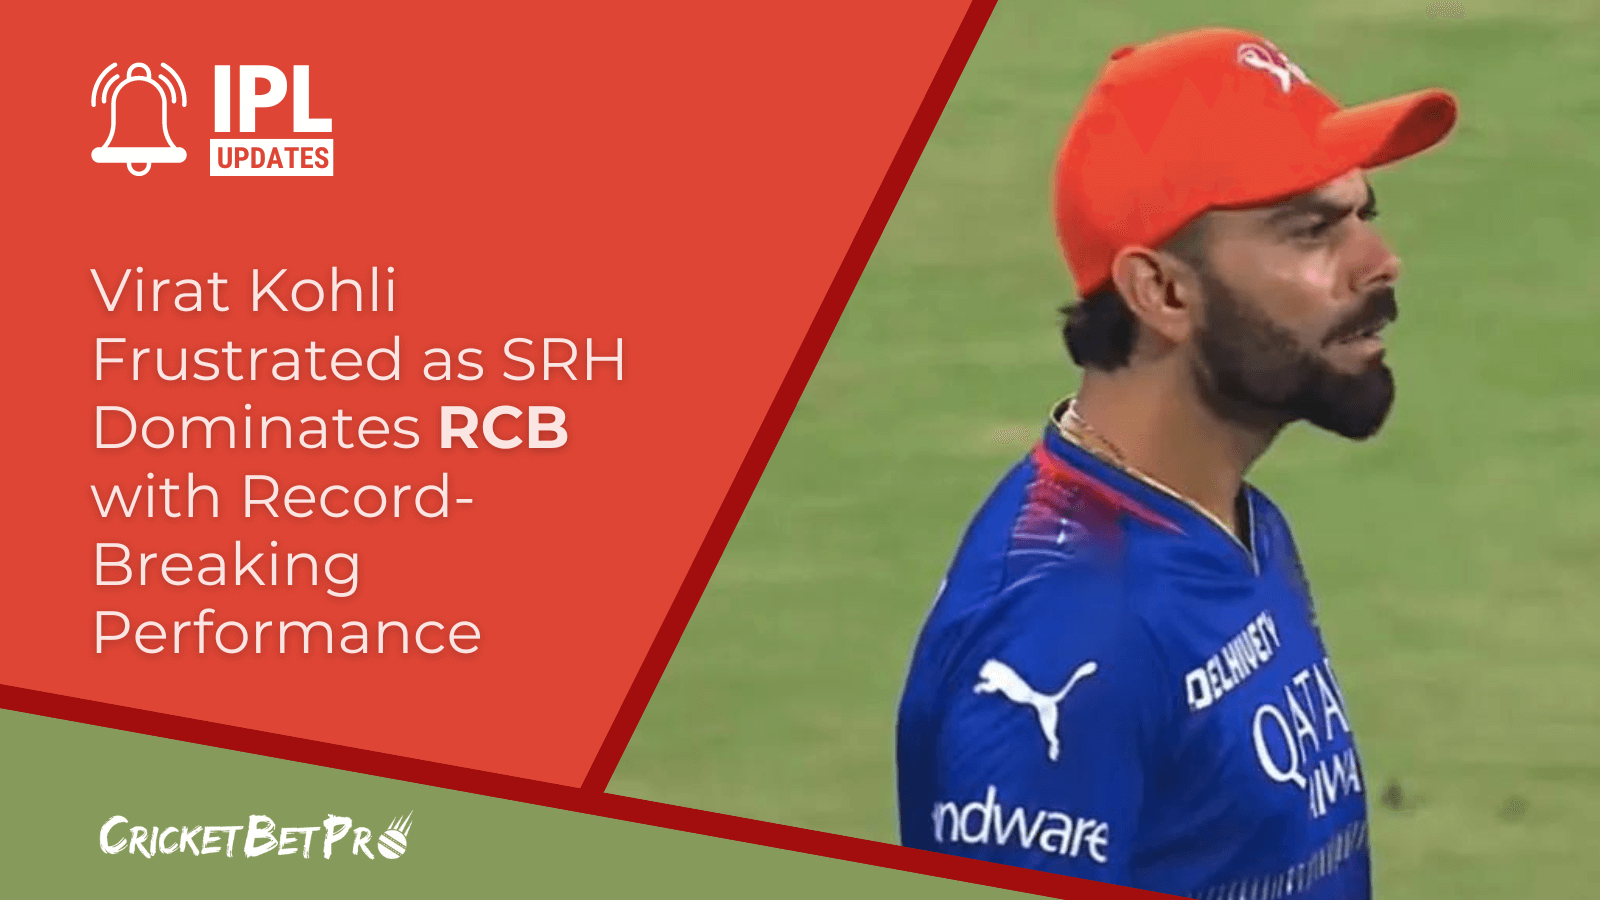 Virat Kohli Frustrated as SRH Dominates RCB with Record-Breaking Performance